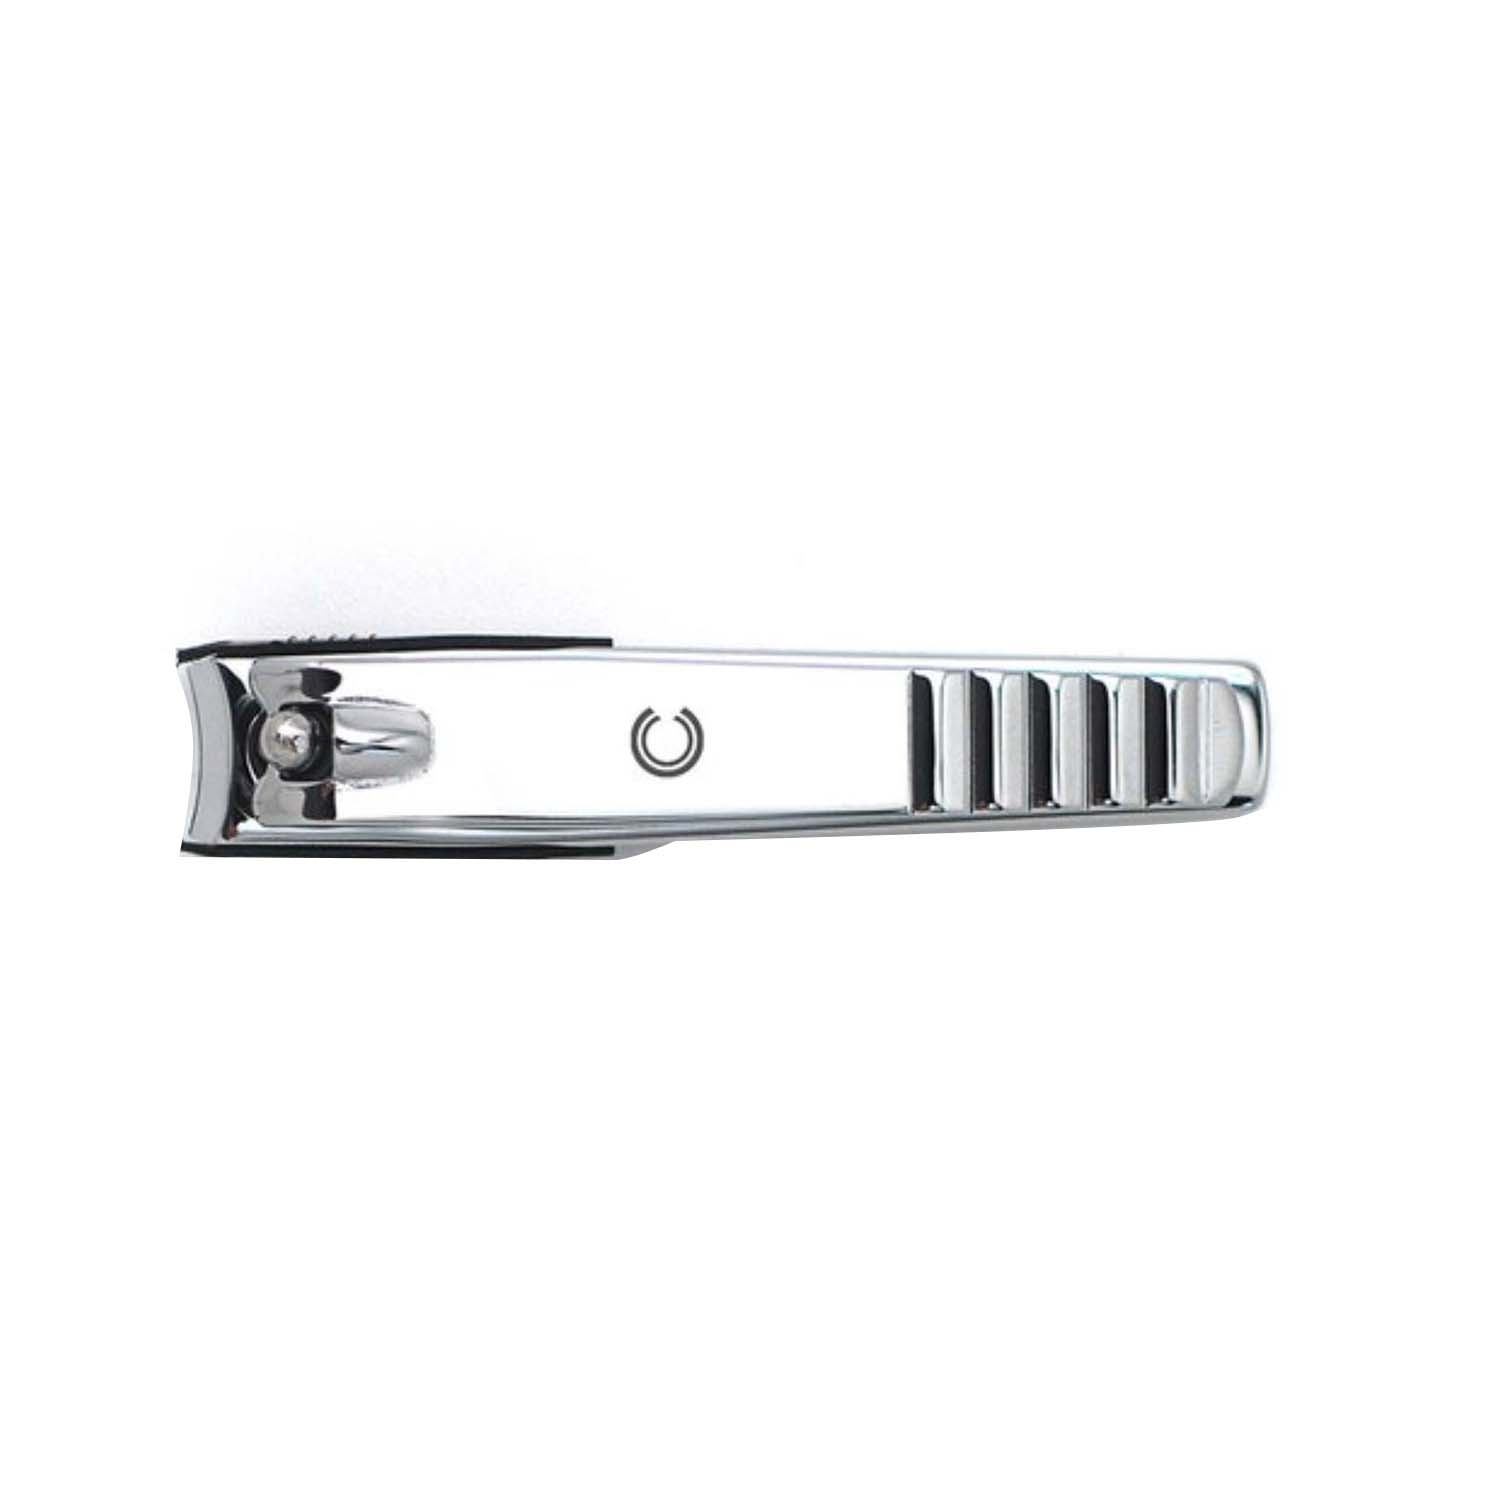 LOYAL INDIA CORPORATION Premium Stainless Steel Sharp Nail Clipper Cutter  for All kind of Nails - Price in India, Buy LOYAL INDIA CORPORATION Premium  Stainless Steel Sharp Nail Clipper Cutter for All